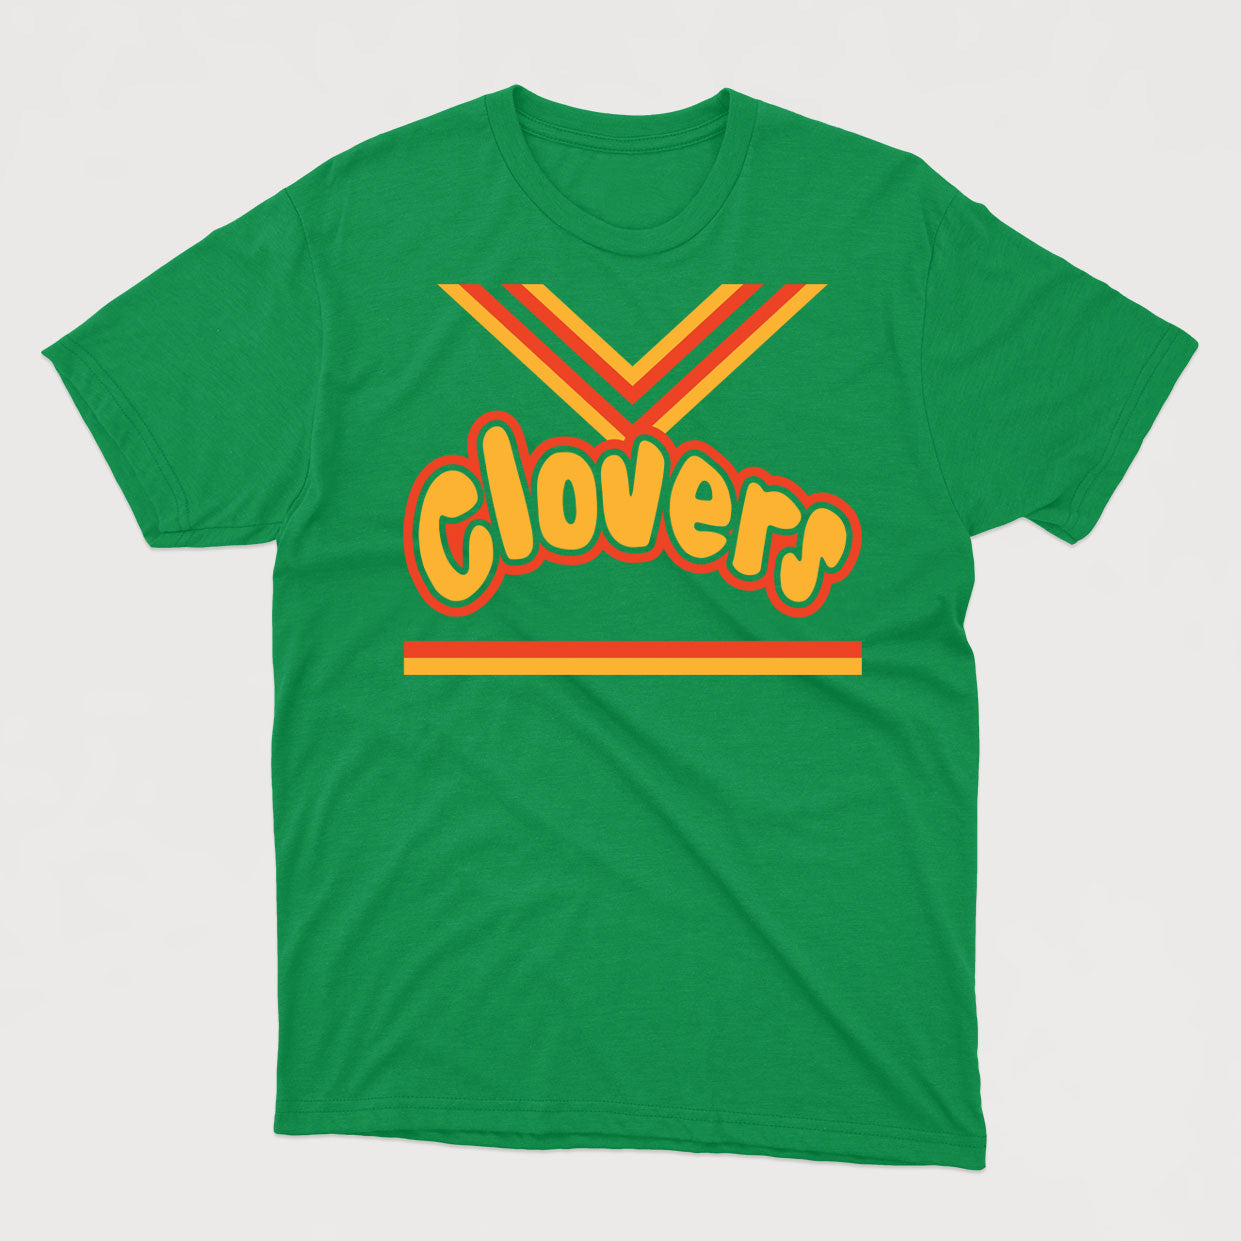 Bring it on (Clovers and Toros) t-shirt unisexe - tamelo boutique